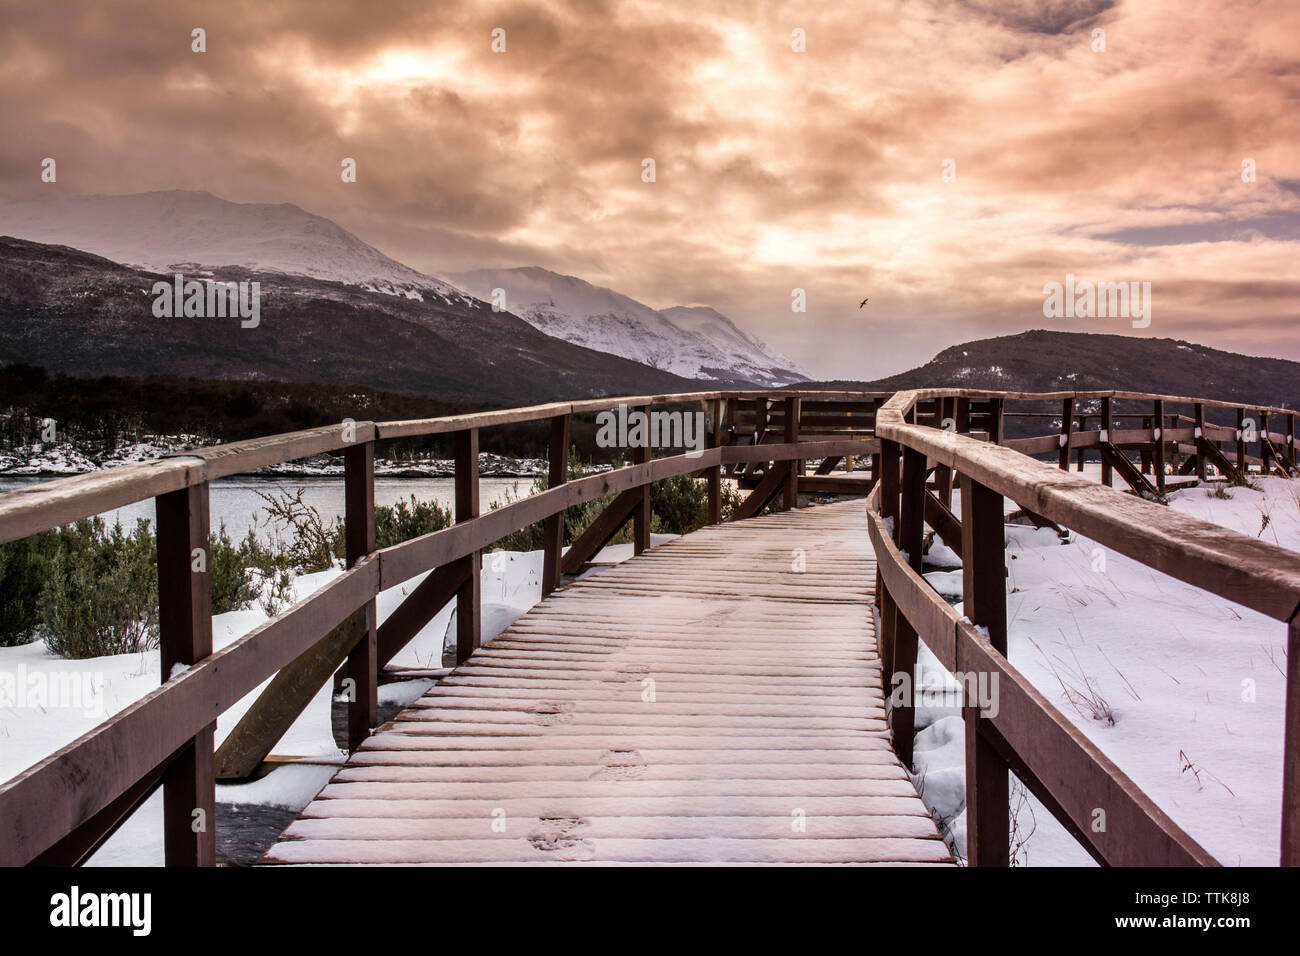 Footbridge against cloudy sky during winter Stock Photo